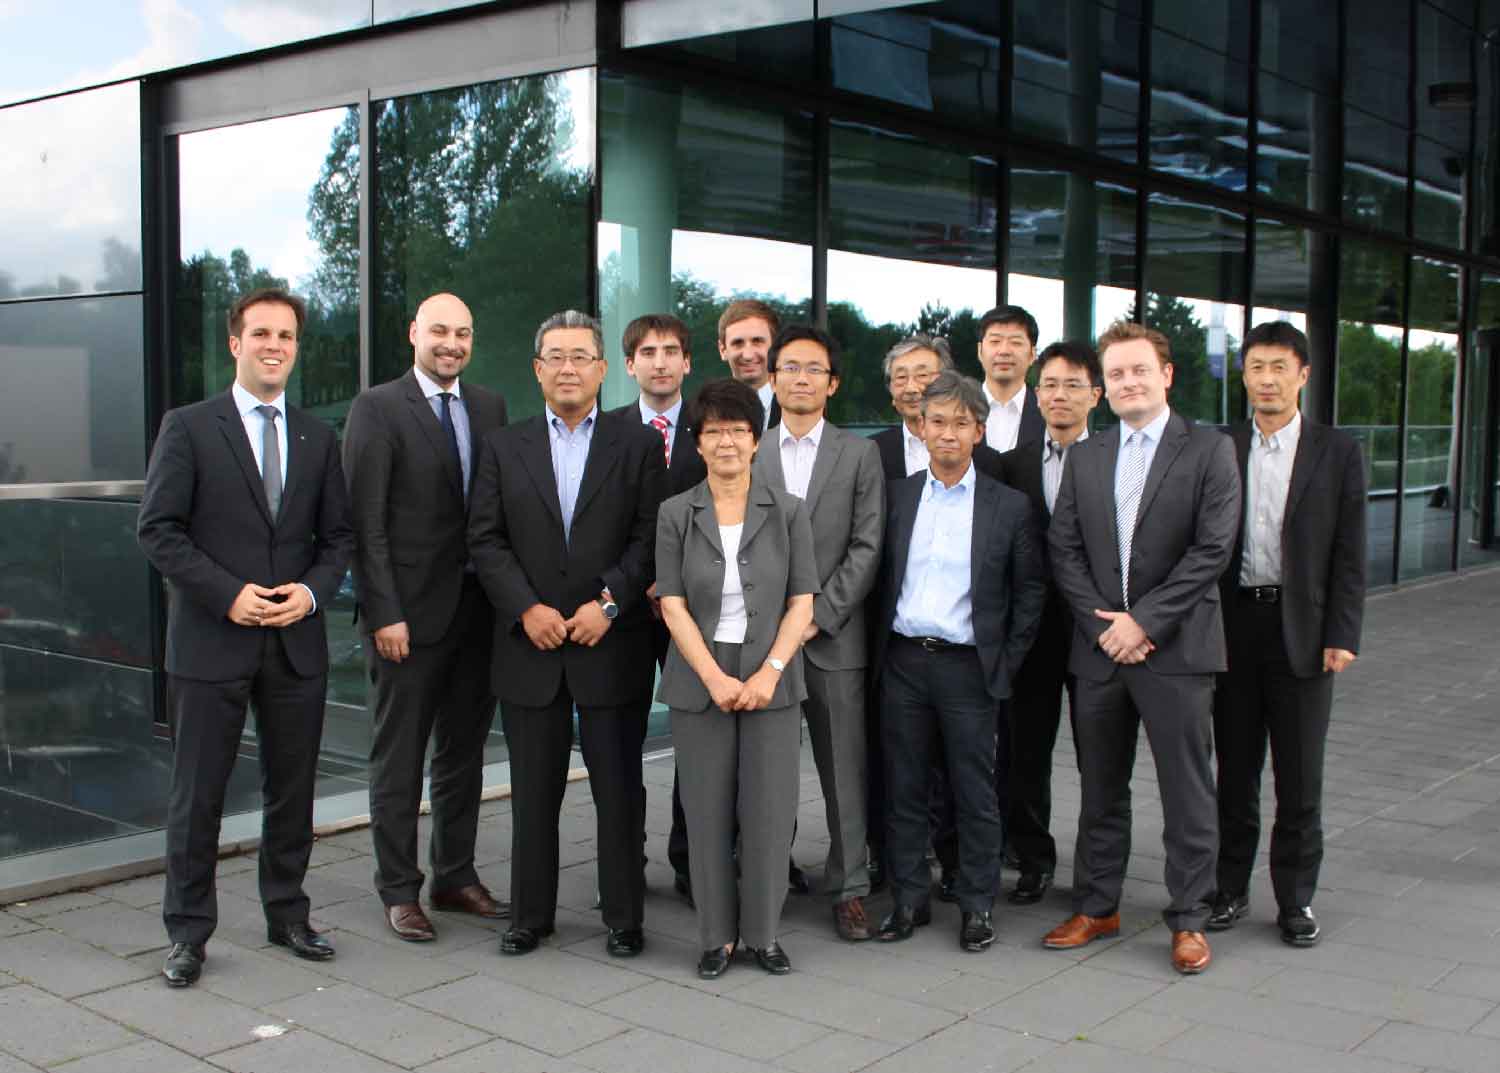 Company representatives from the Japanese automotive industry and ISID visit the Fraunhofer Institute for Mechatronic Systems Design IEM in Paderborn.